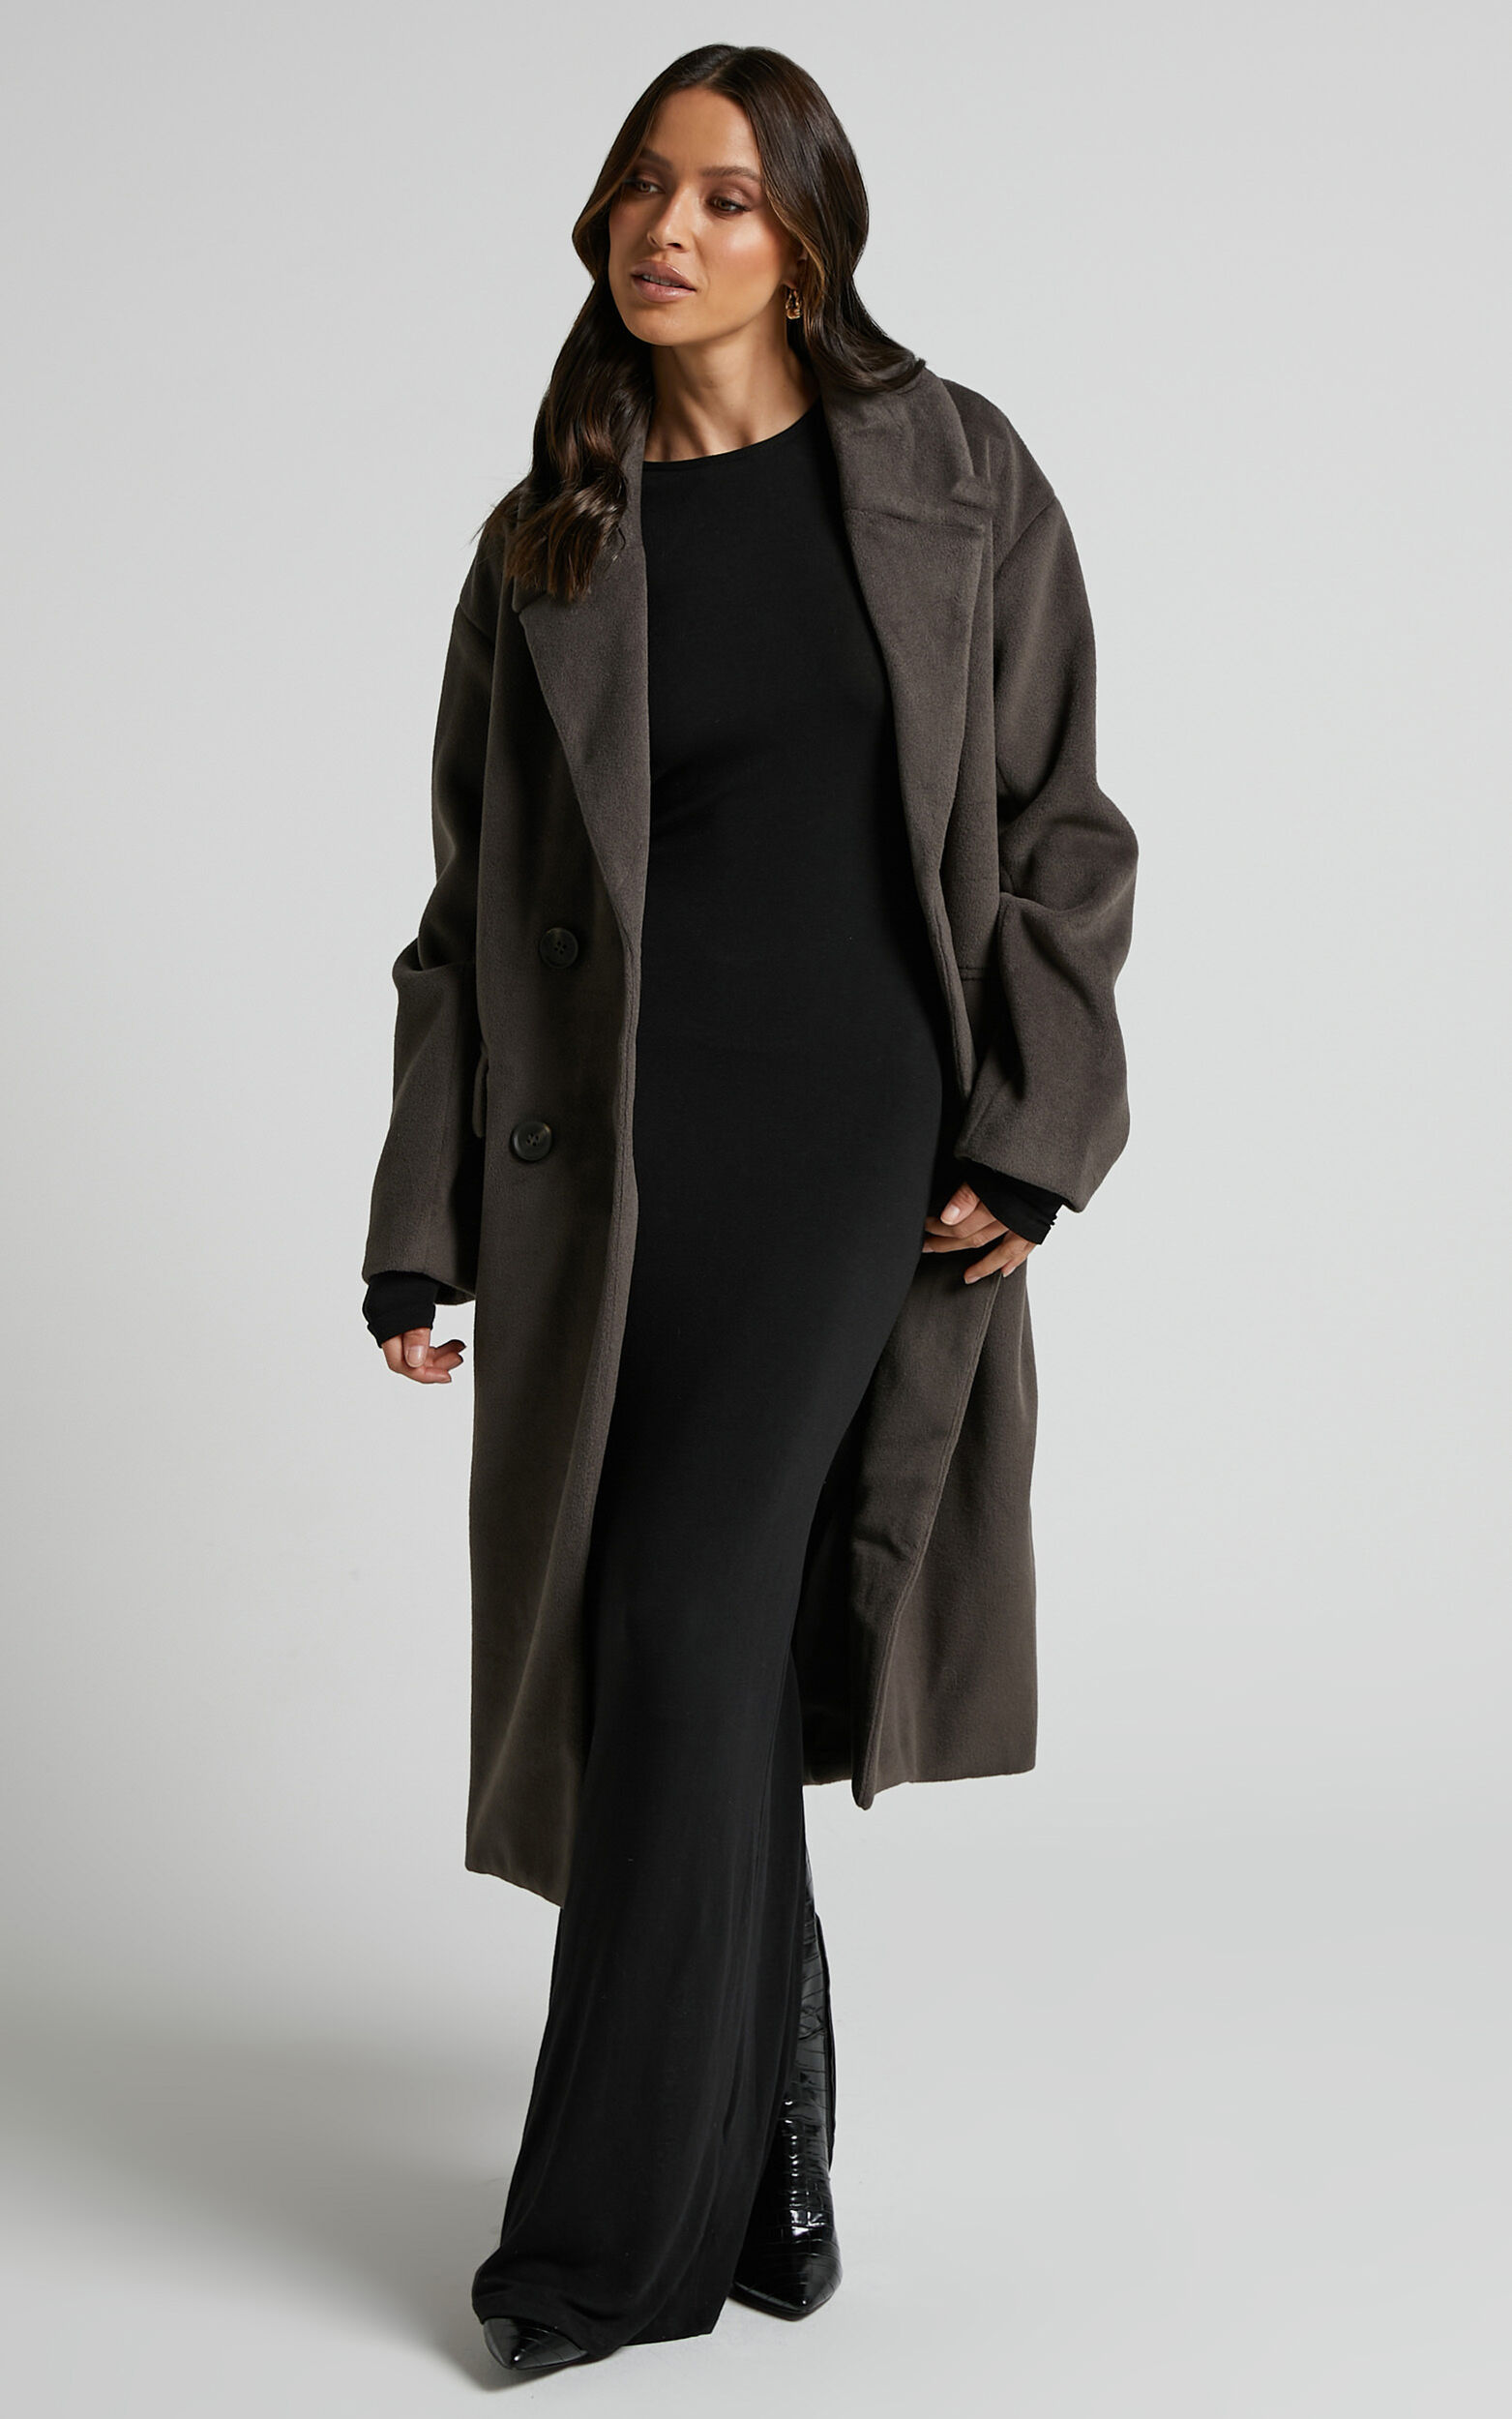 Libee Coat - Double Breasted Longline Coat in Charcoal - 04, GRY1